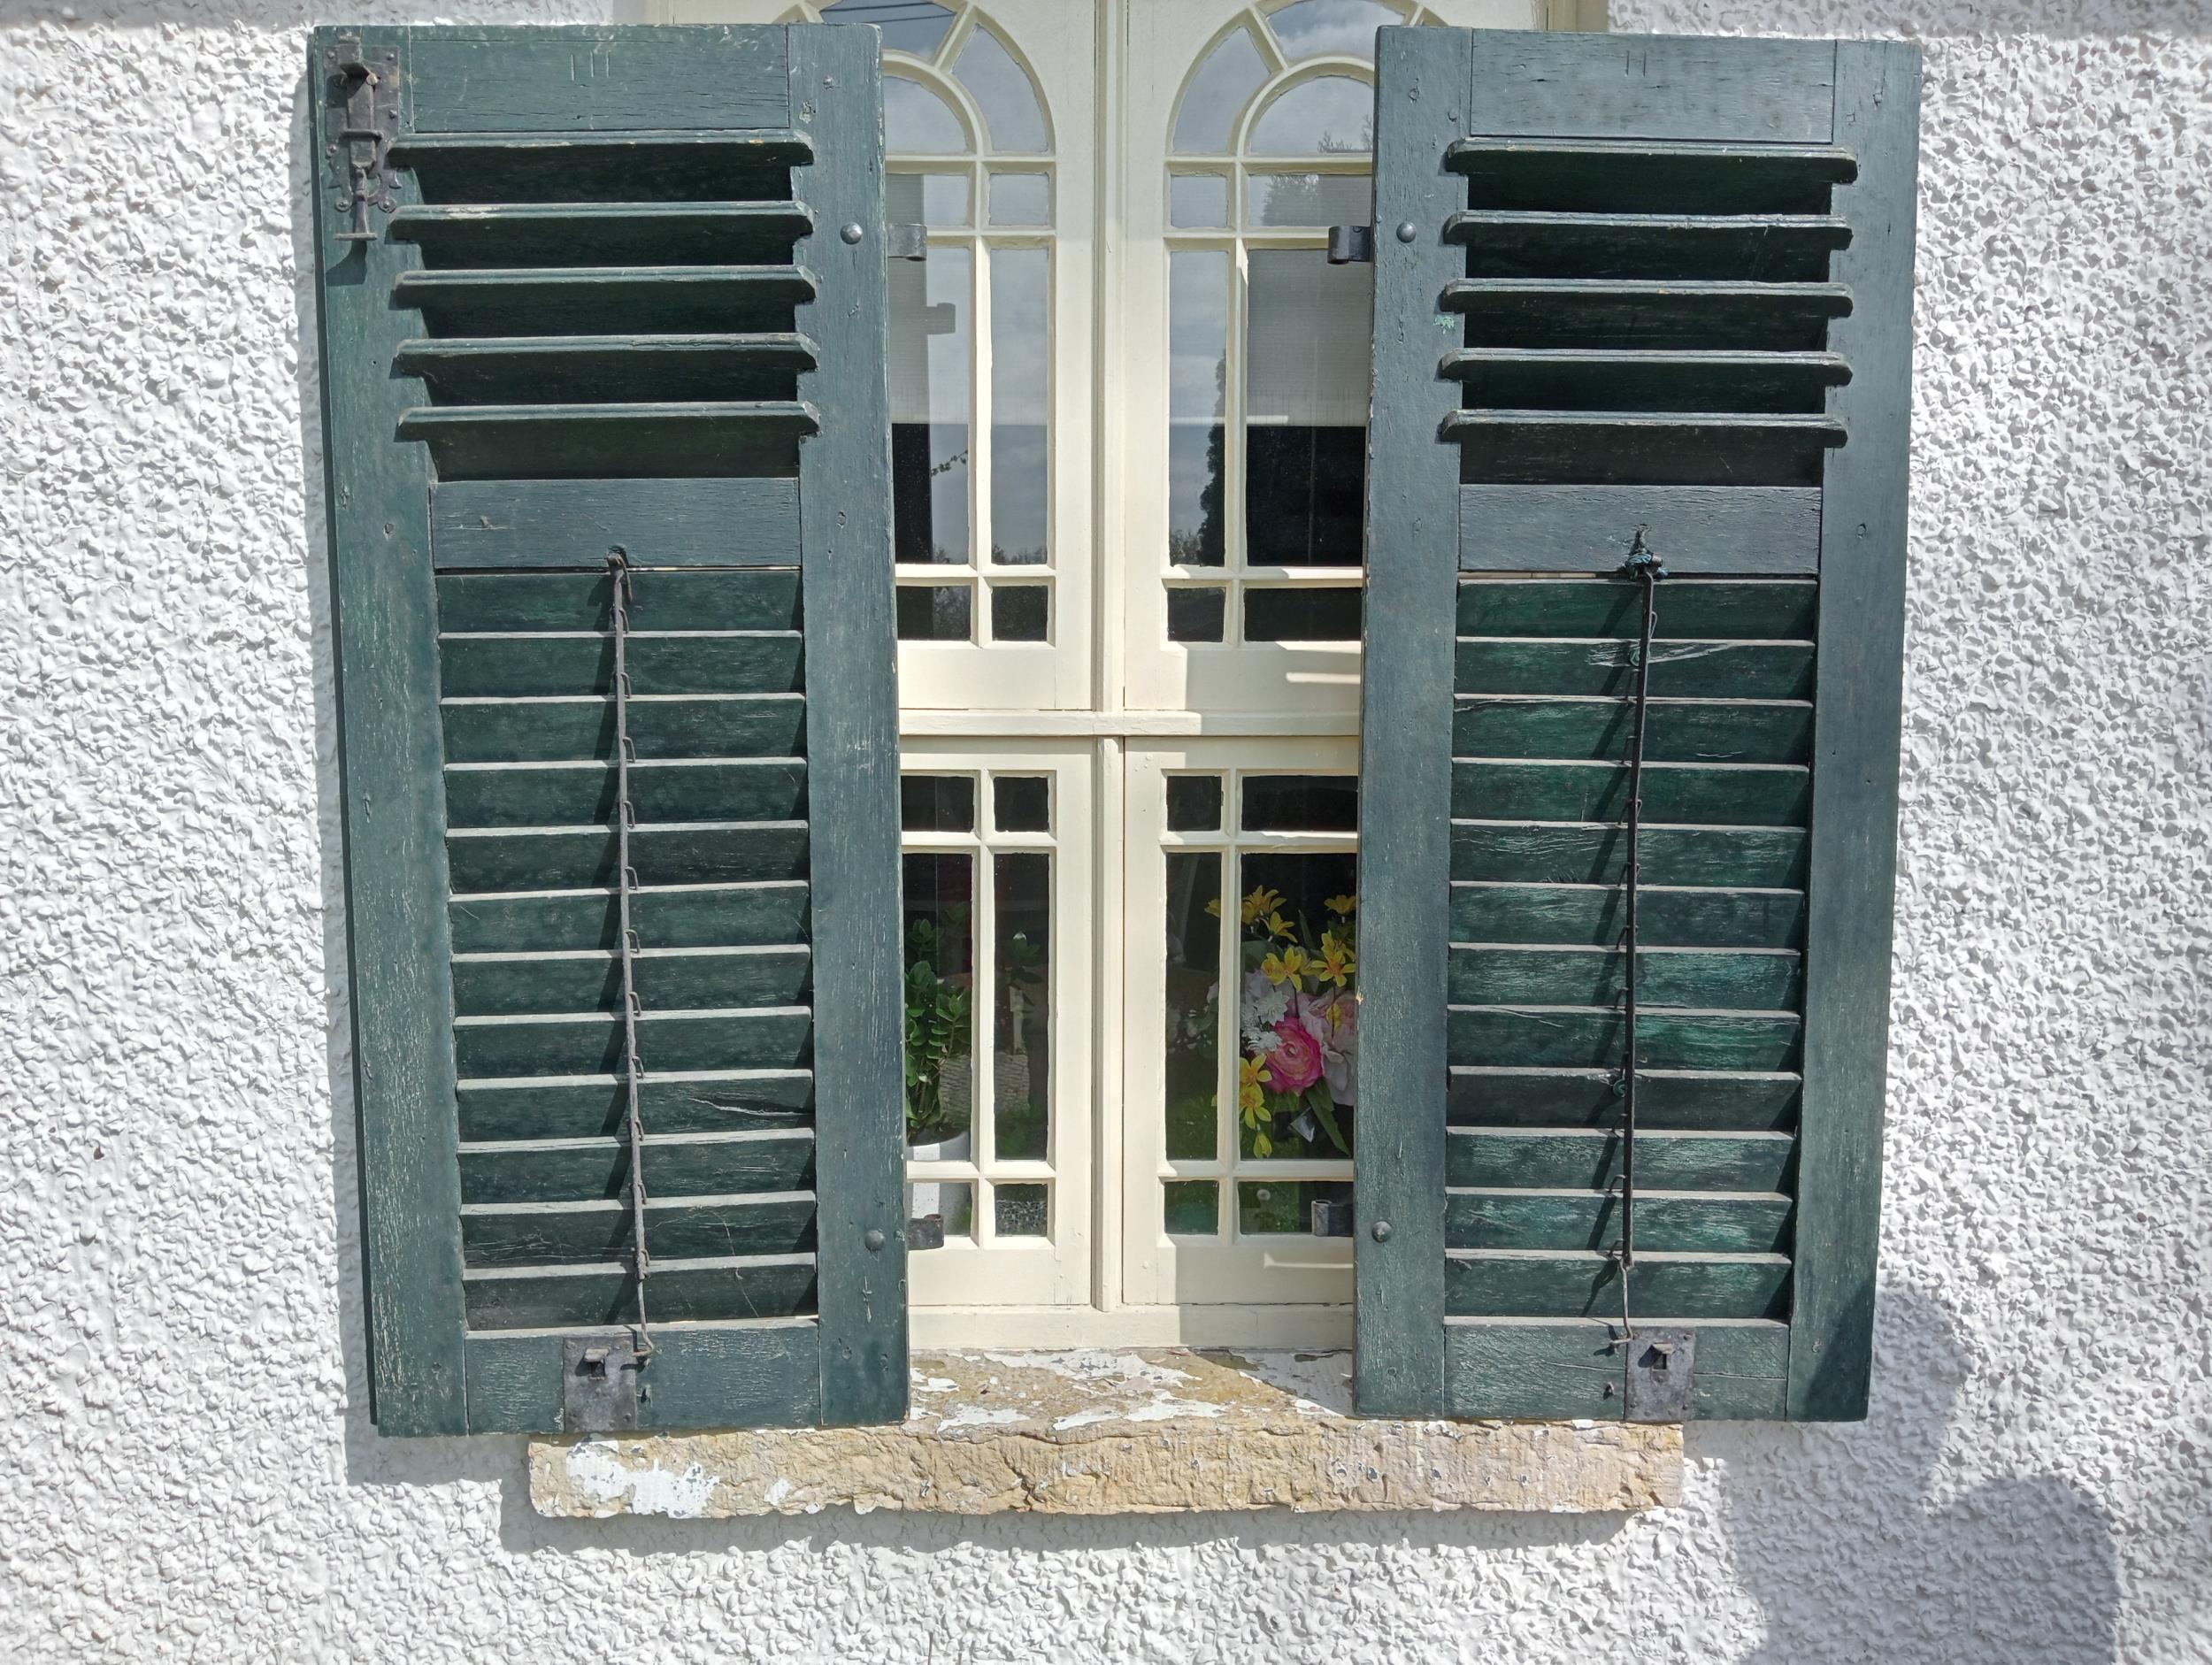 Pair of French style green louvred window shutters {H 134cm x W 105cm x D 5cm}.